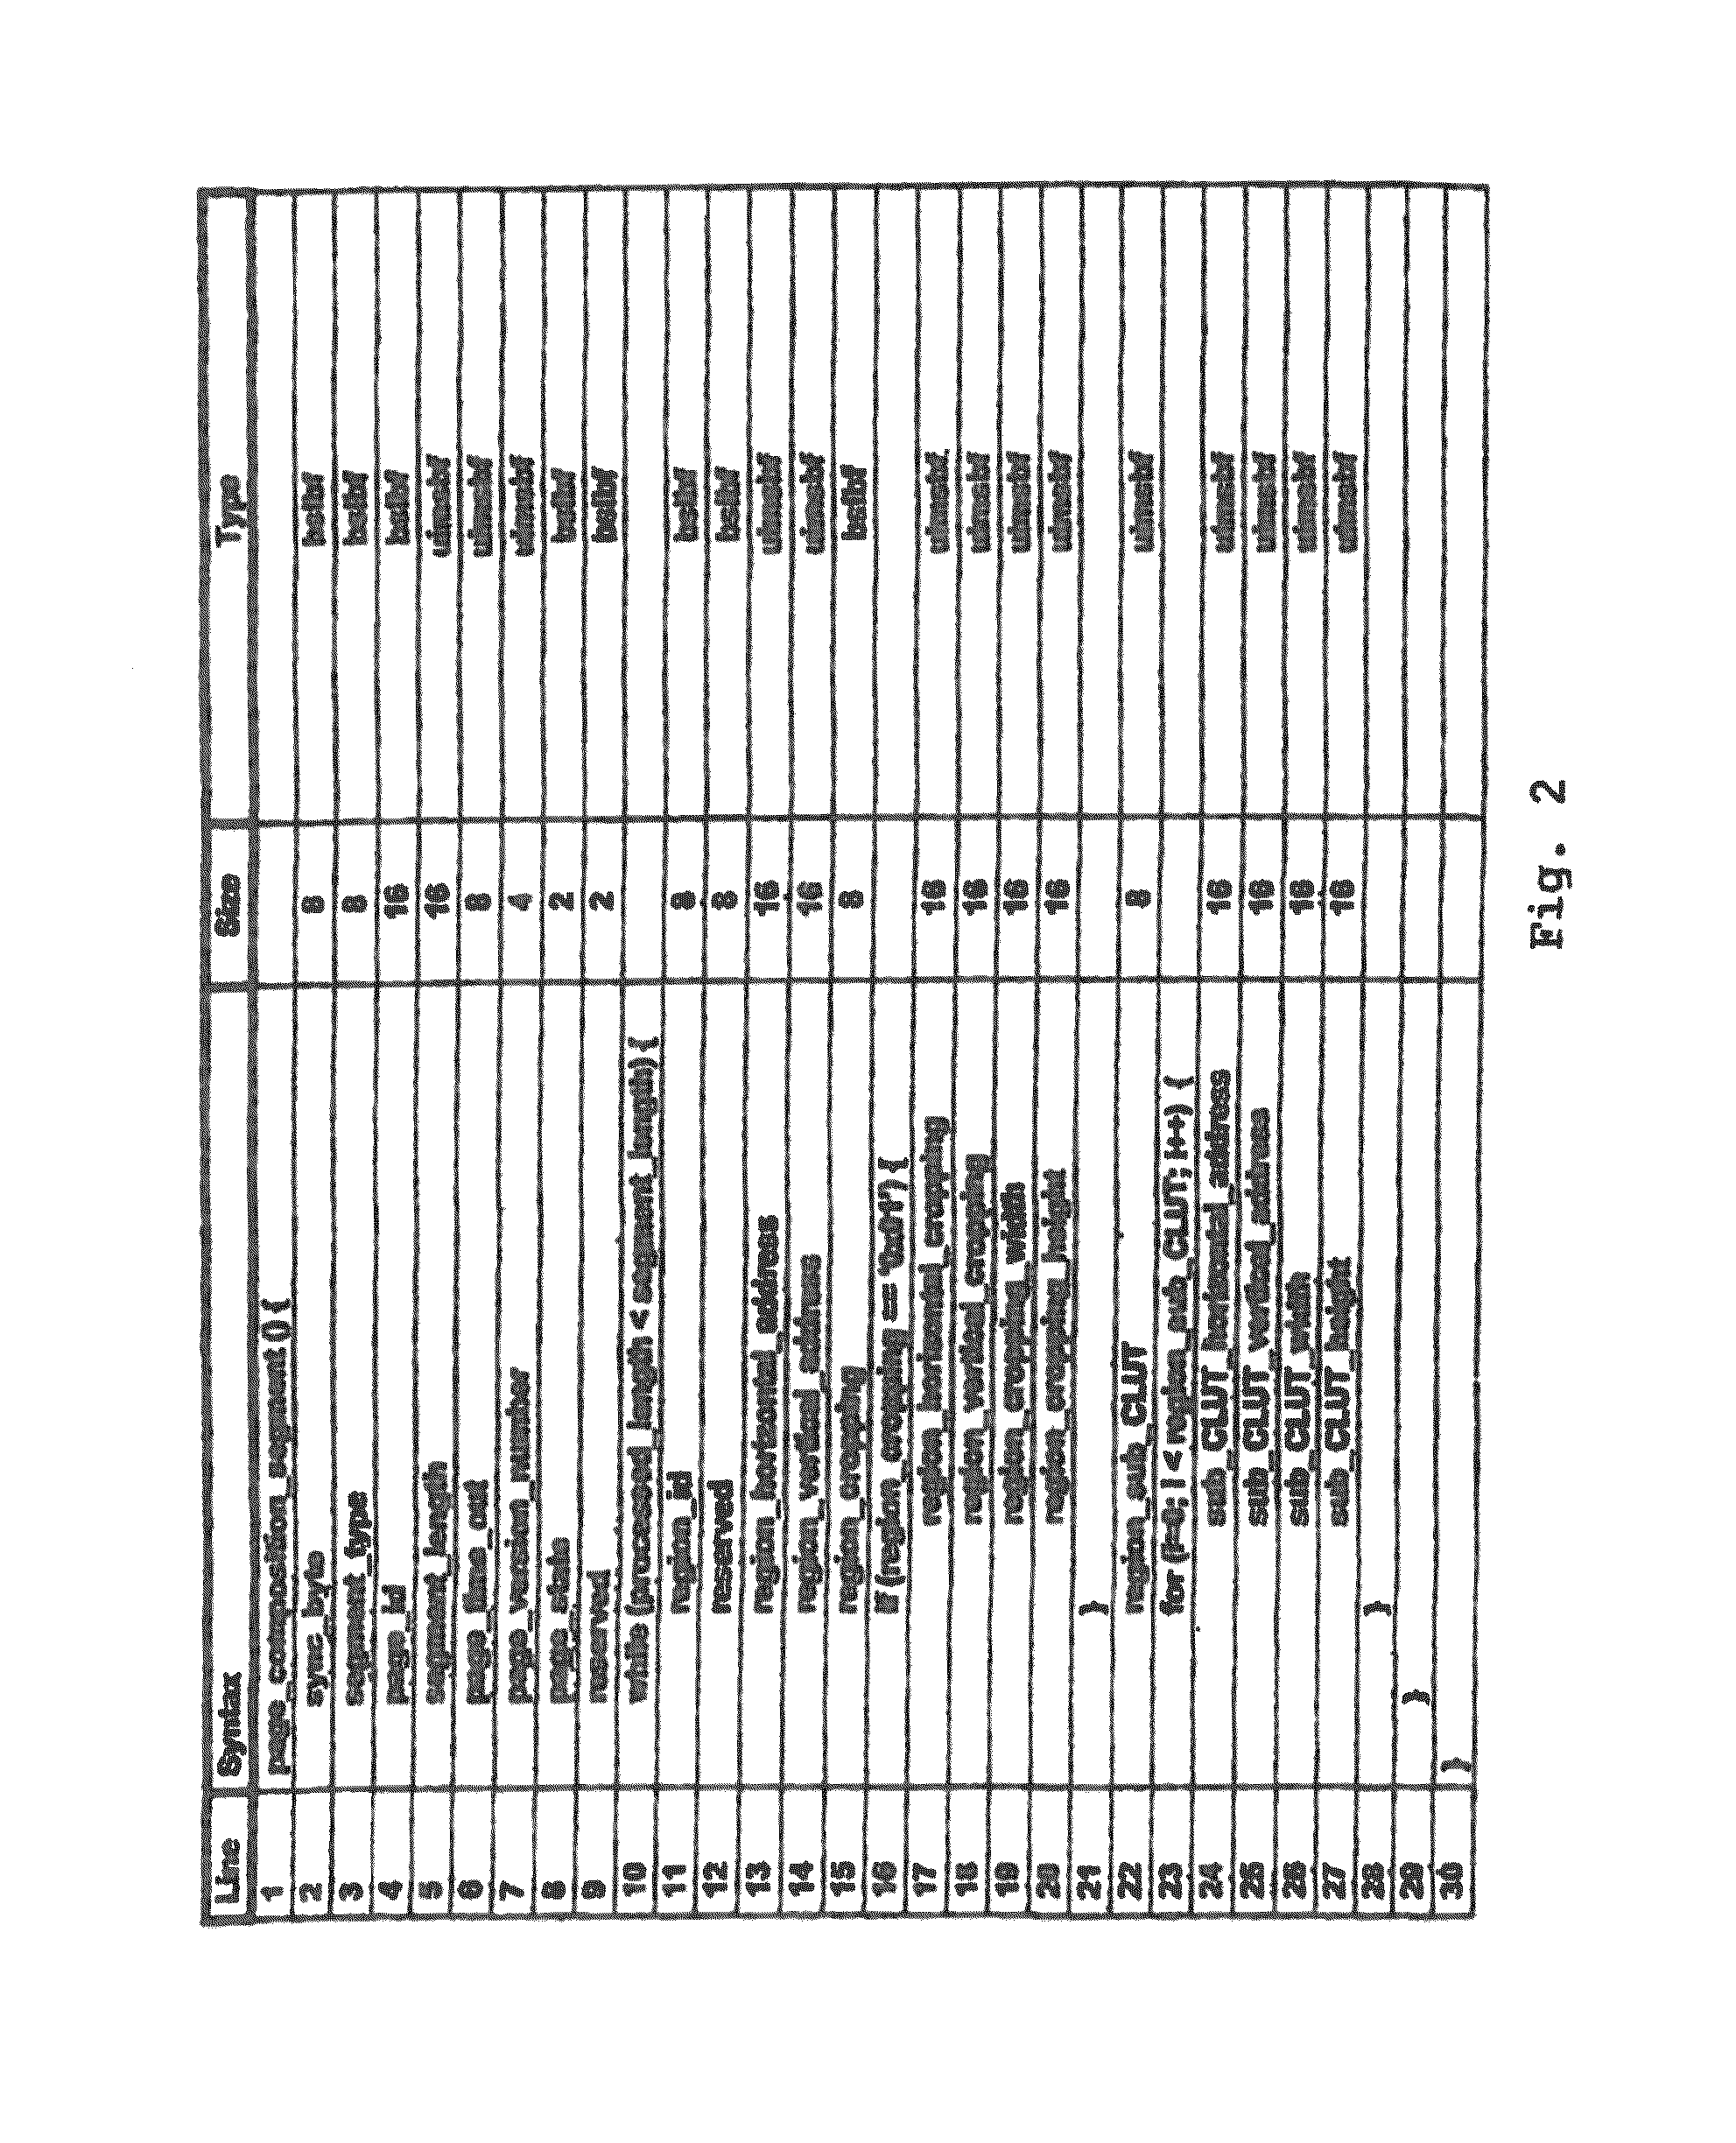 Method and apparatus for composition of subtitles